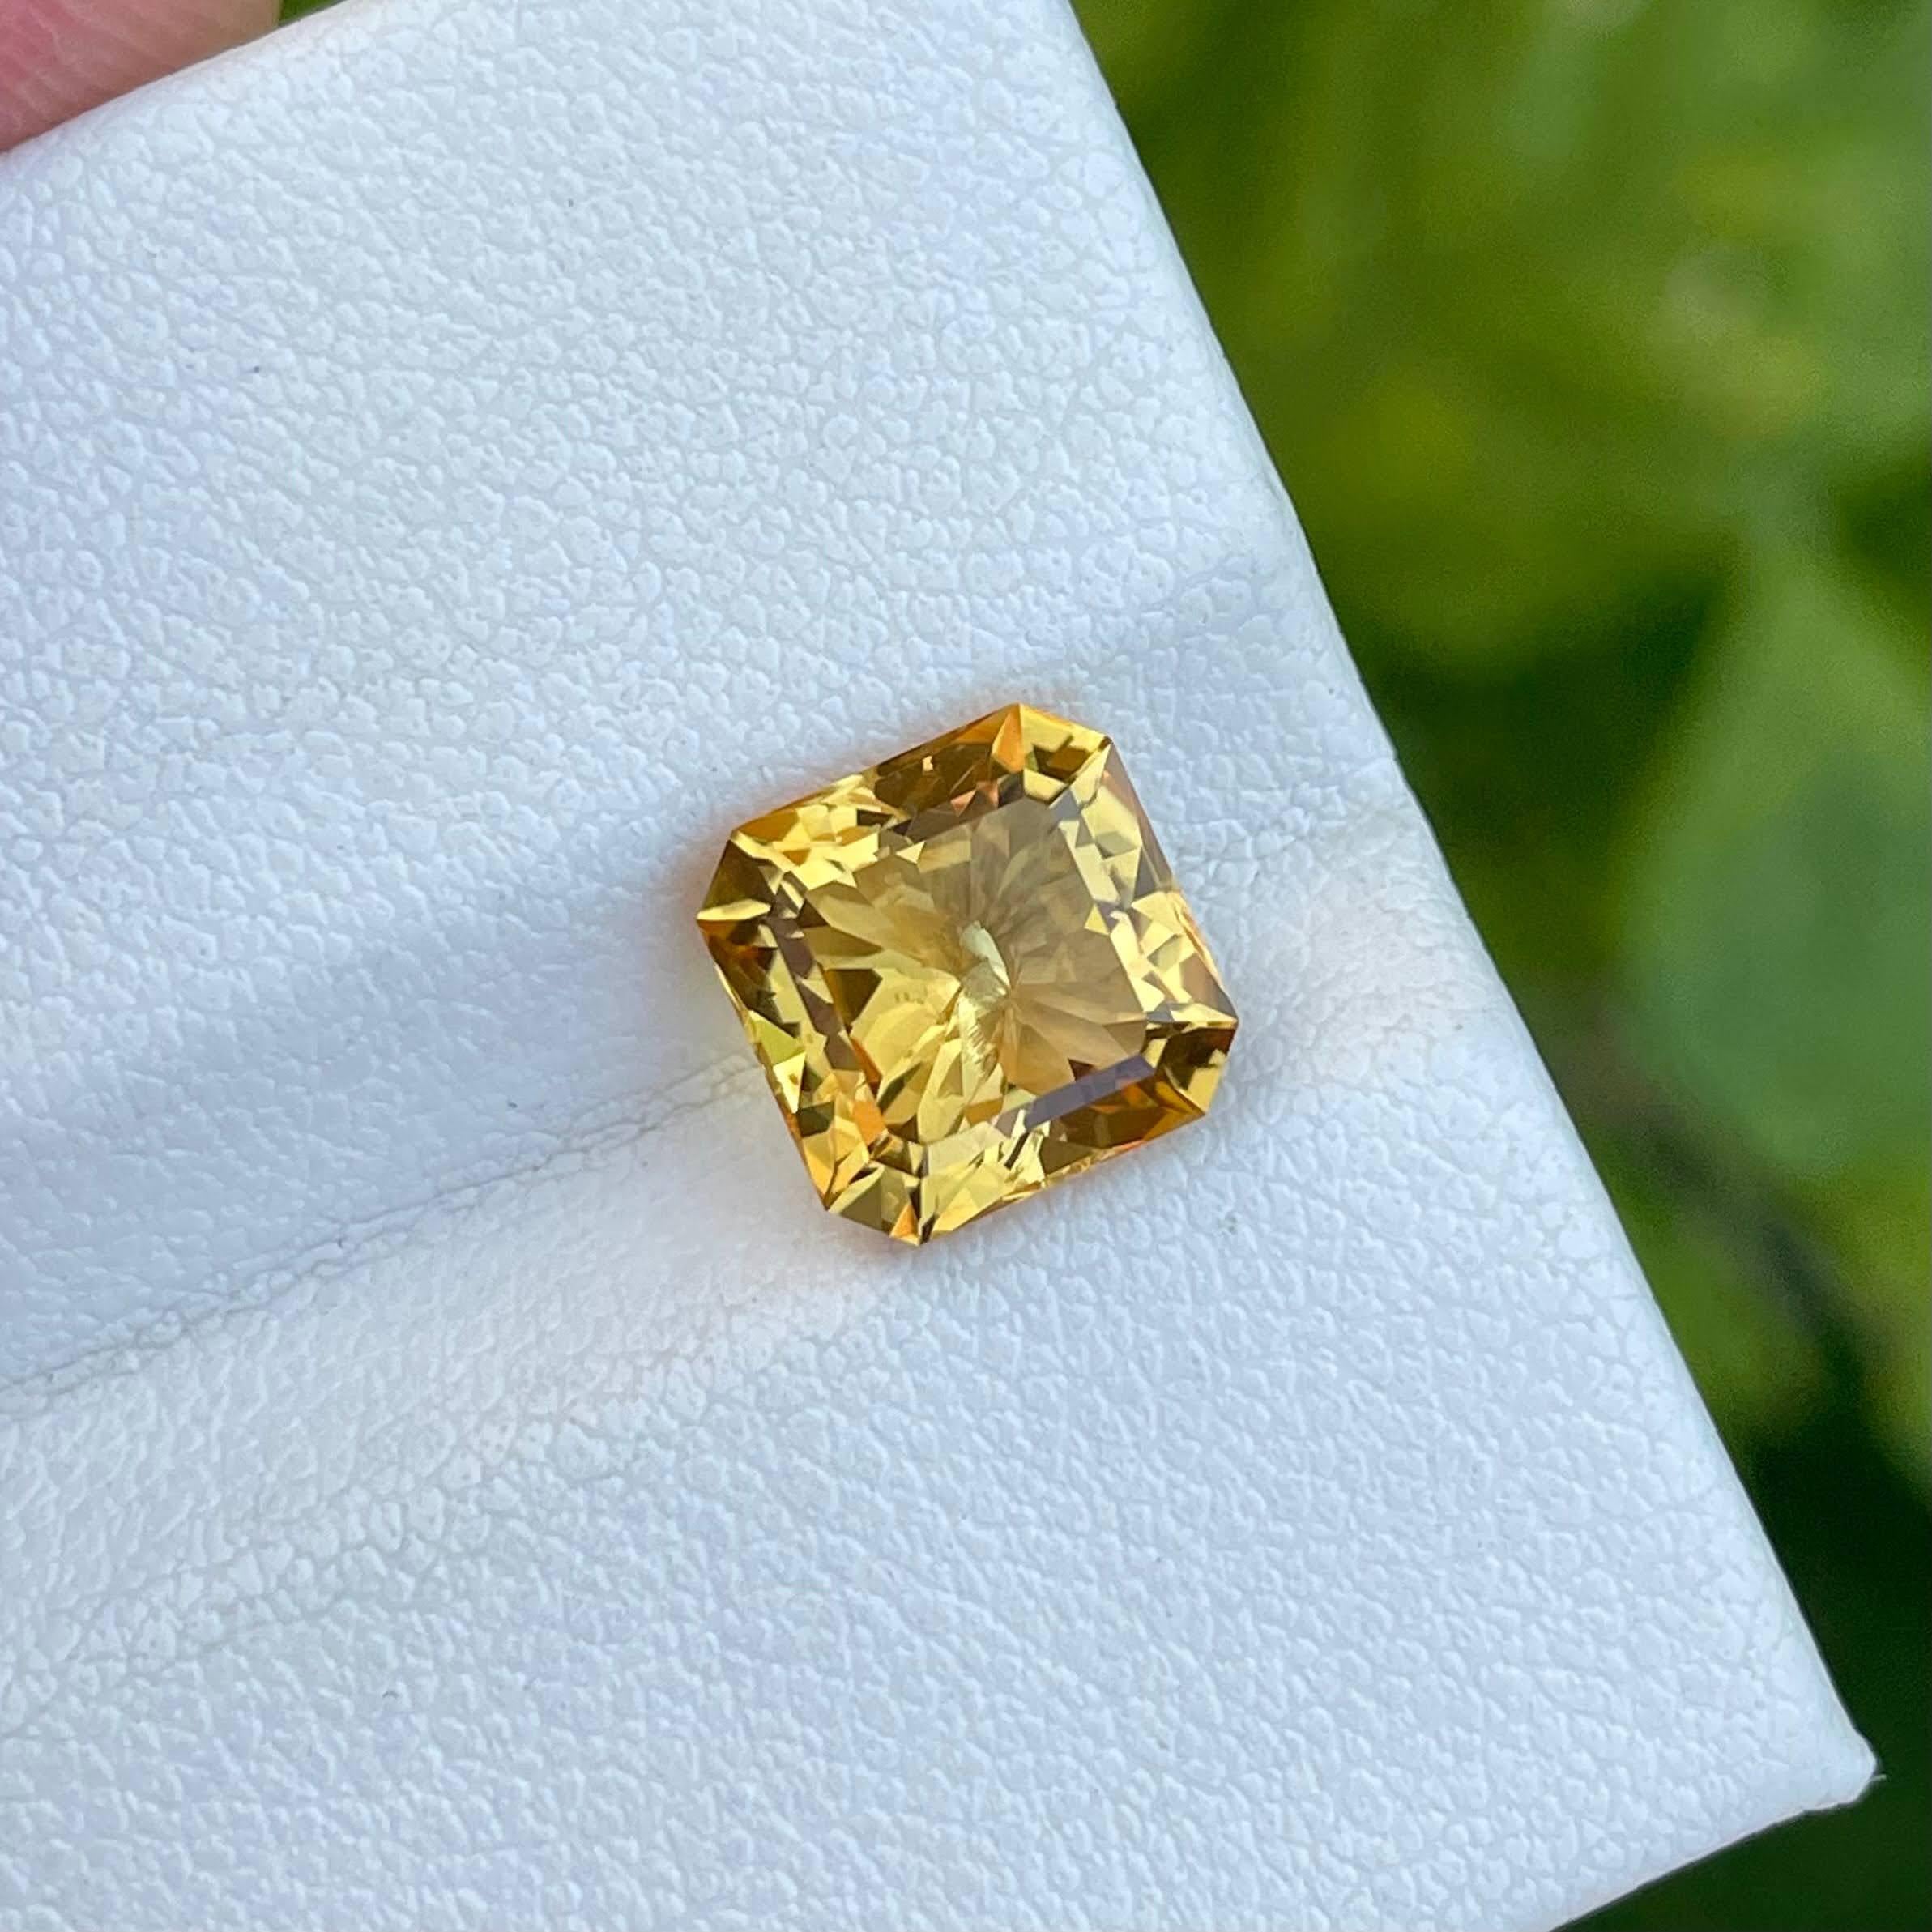 Weight 2.55 carats 
Dimensions 8.3x8.3x5.7 mm 
Treatment none 
Origin Brazil 
Clarity SI 
Shape octagon 
Cut Asscher 



Imbued with the fiery hues of a Brazilian sunset, this exquisite orange citrine stone captivates with its radiant beauty.